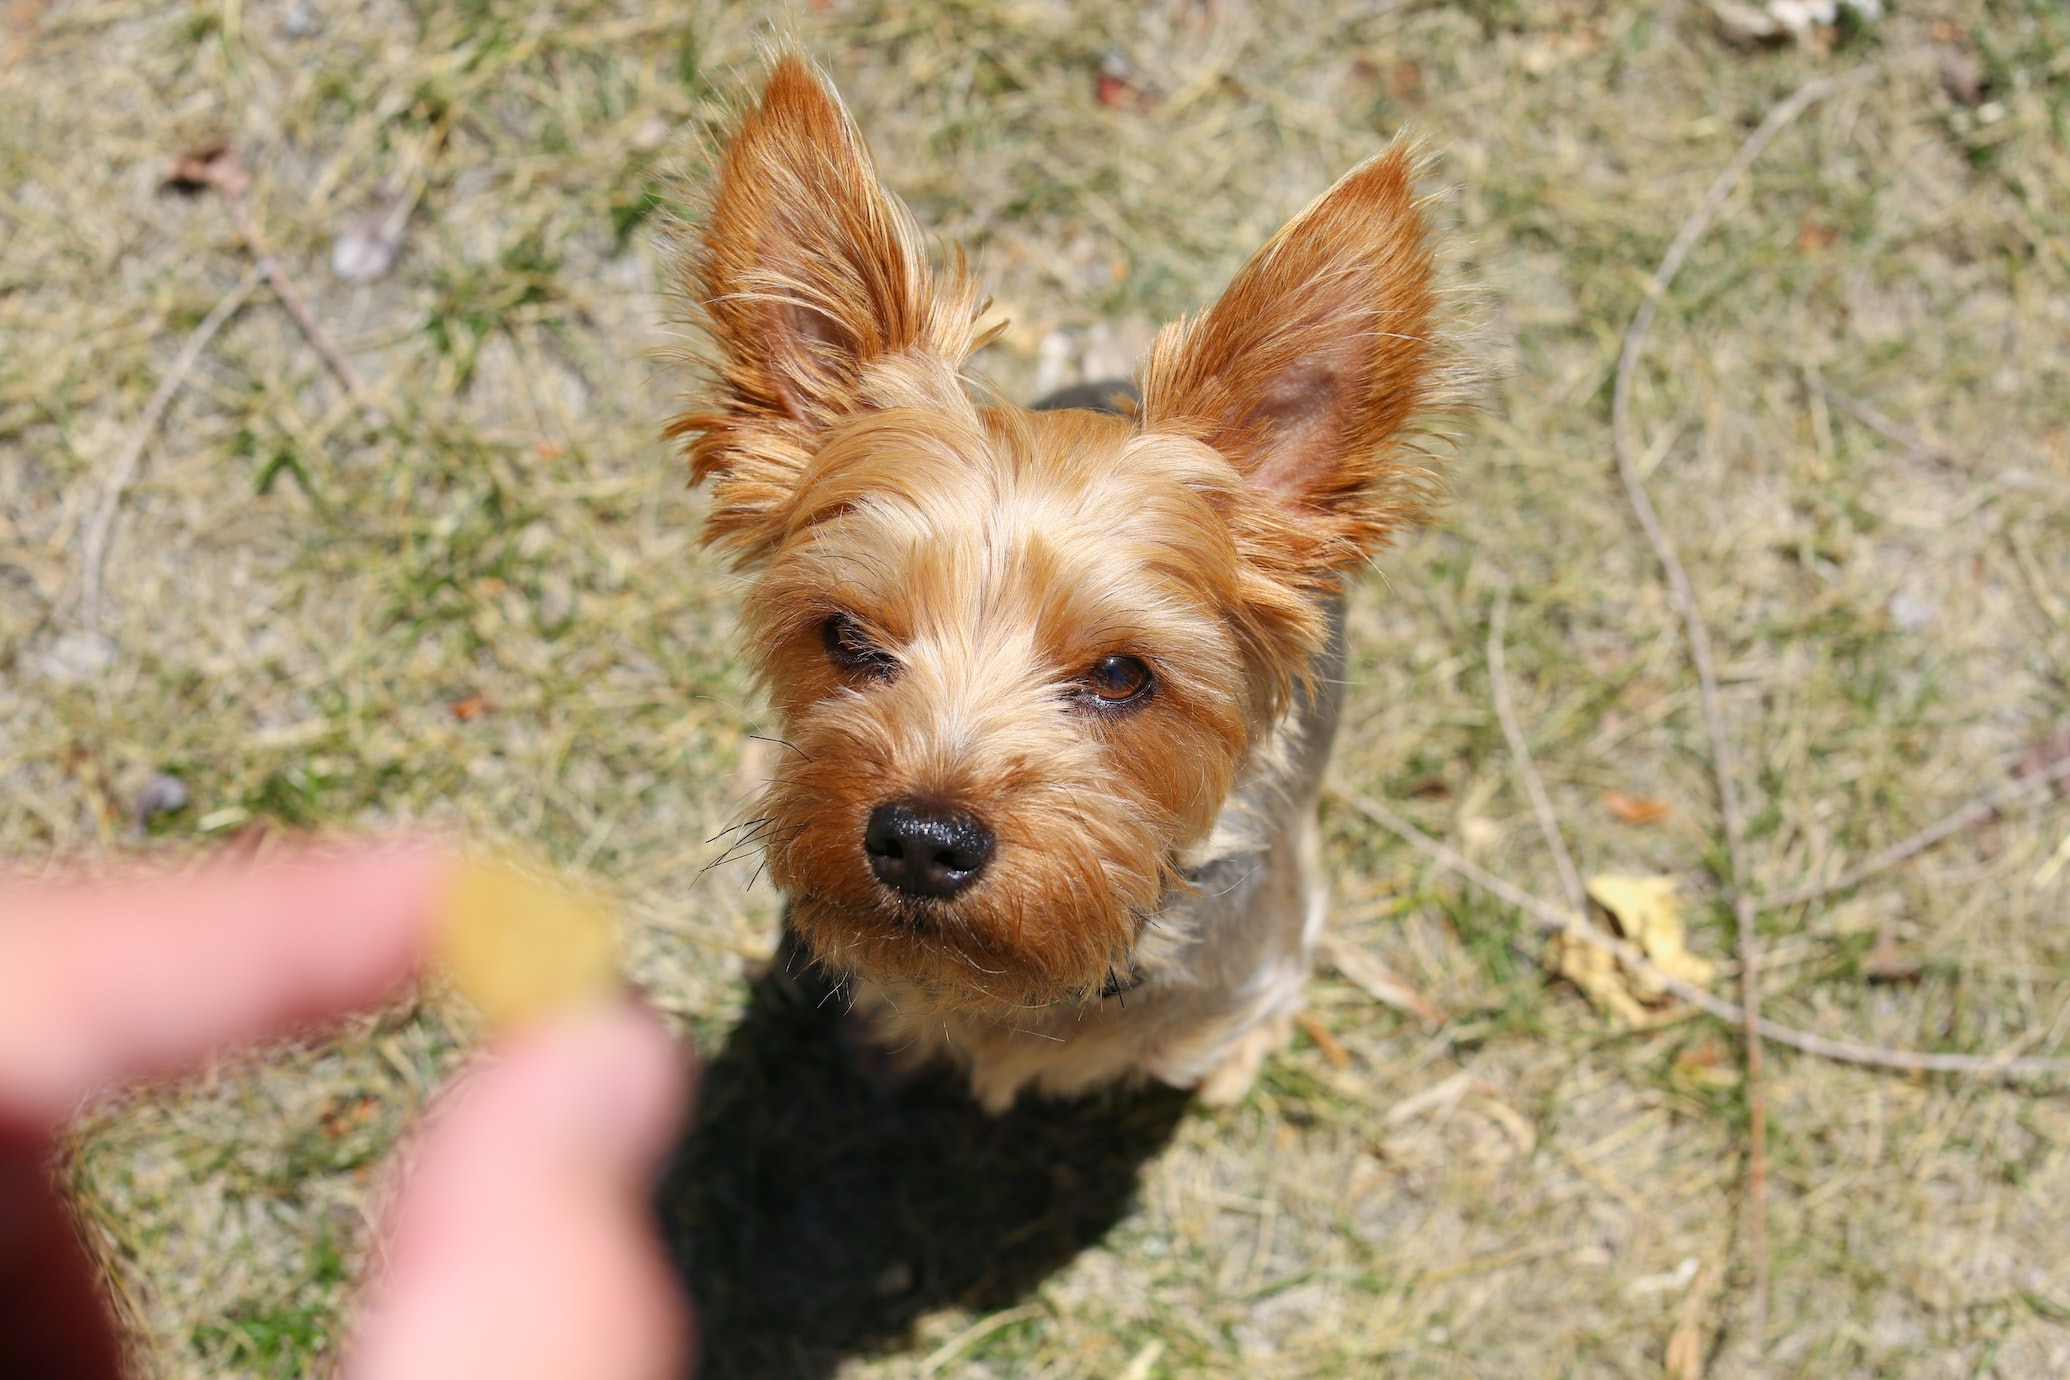 tiny Yorkie attentively eyeing a treat held by owner on lush green grass